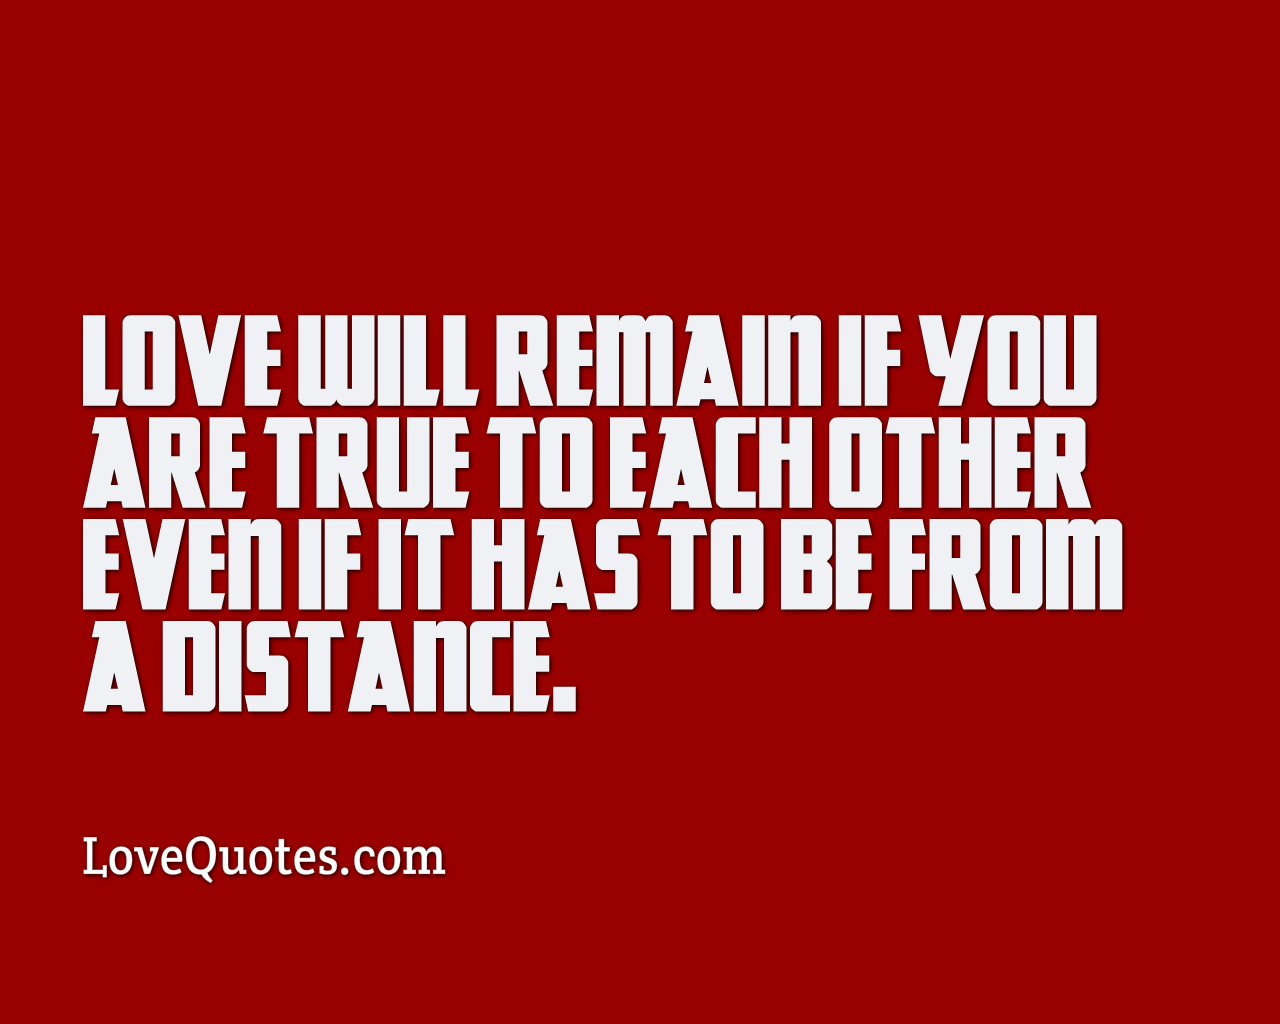 Love Will Remain